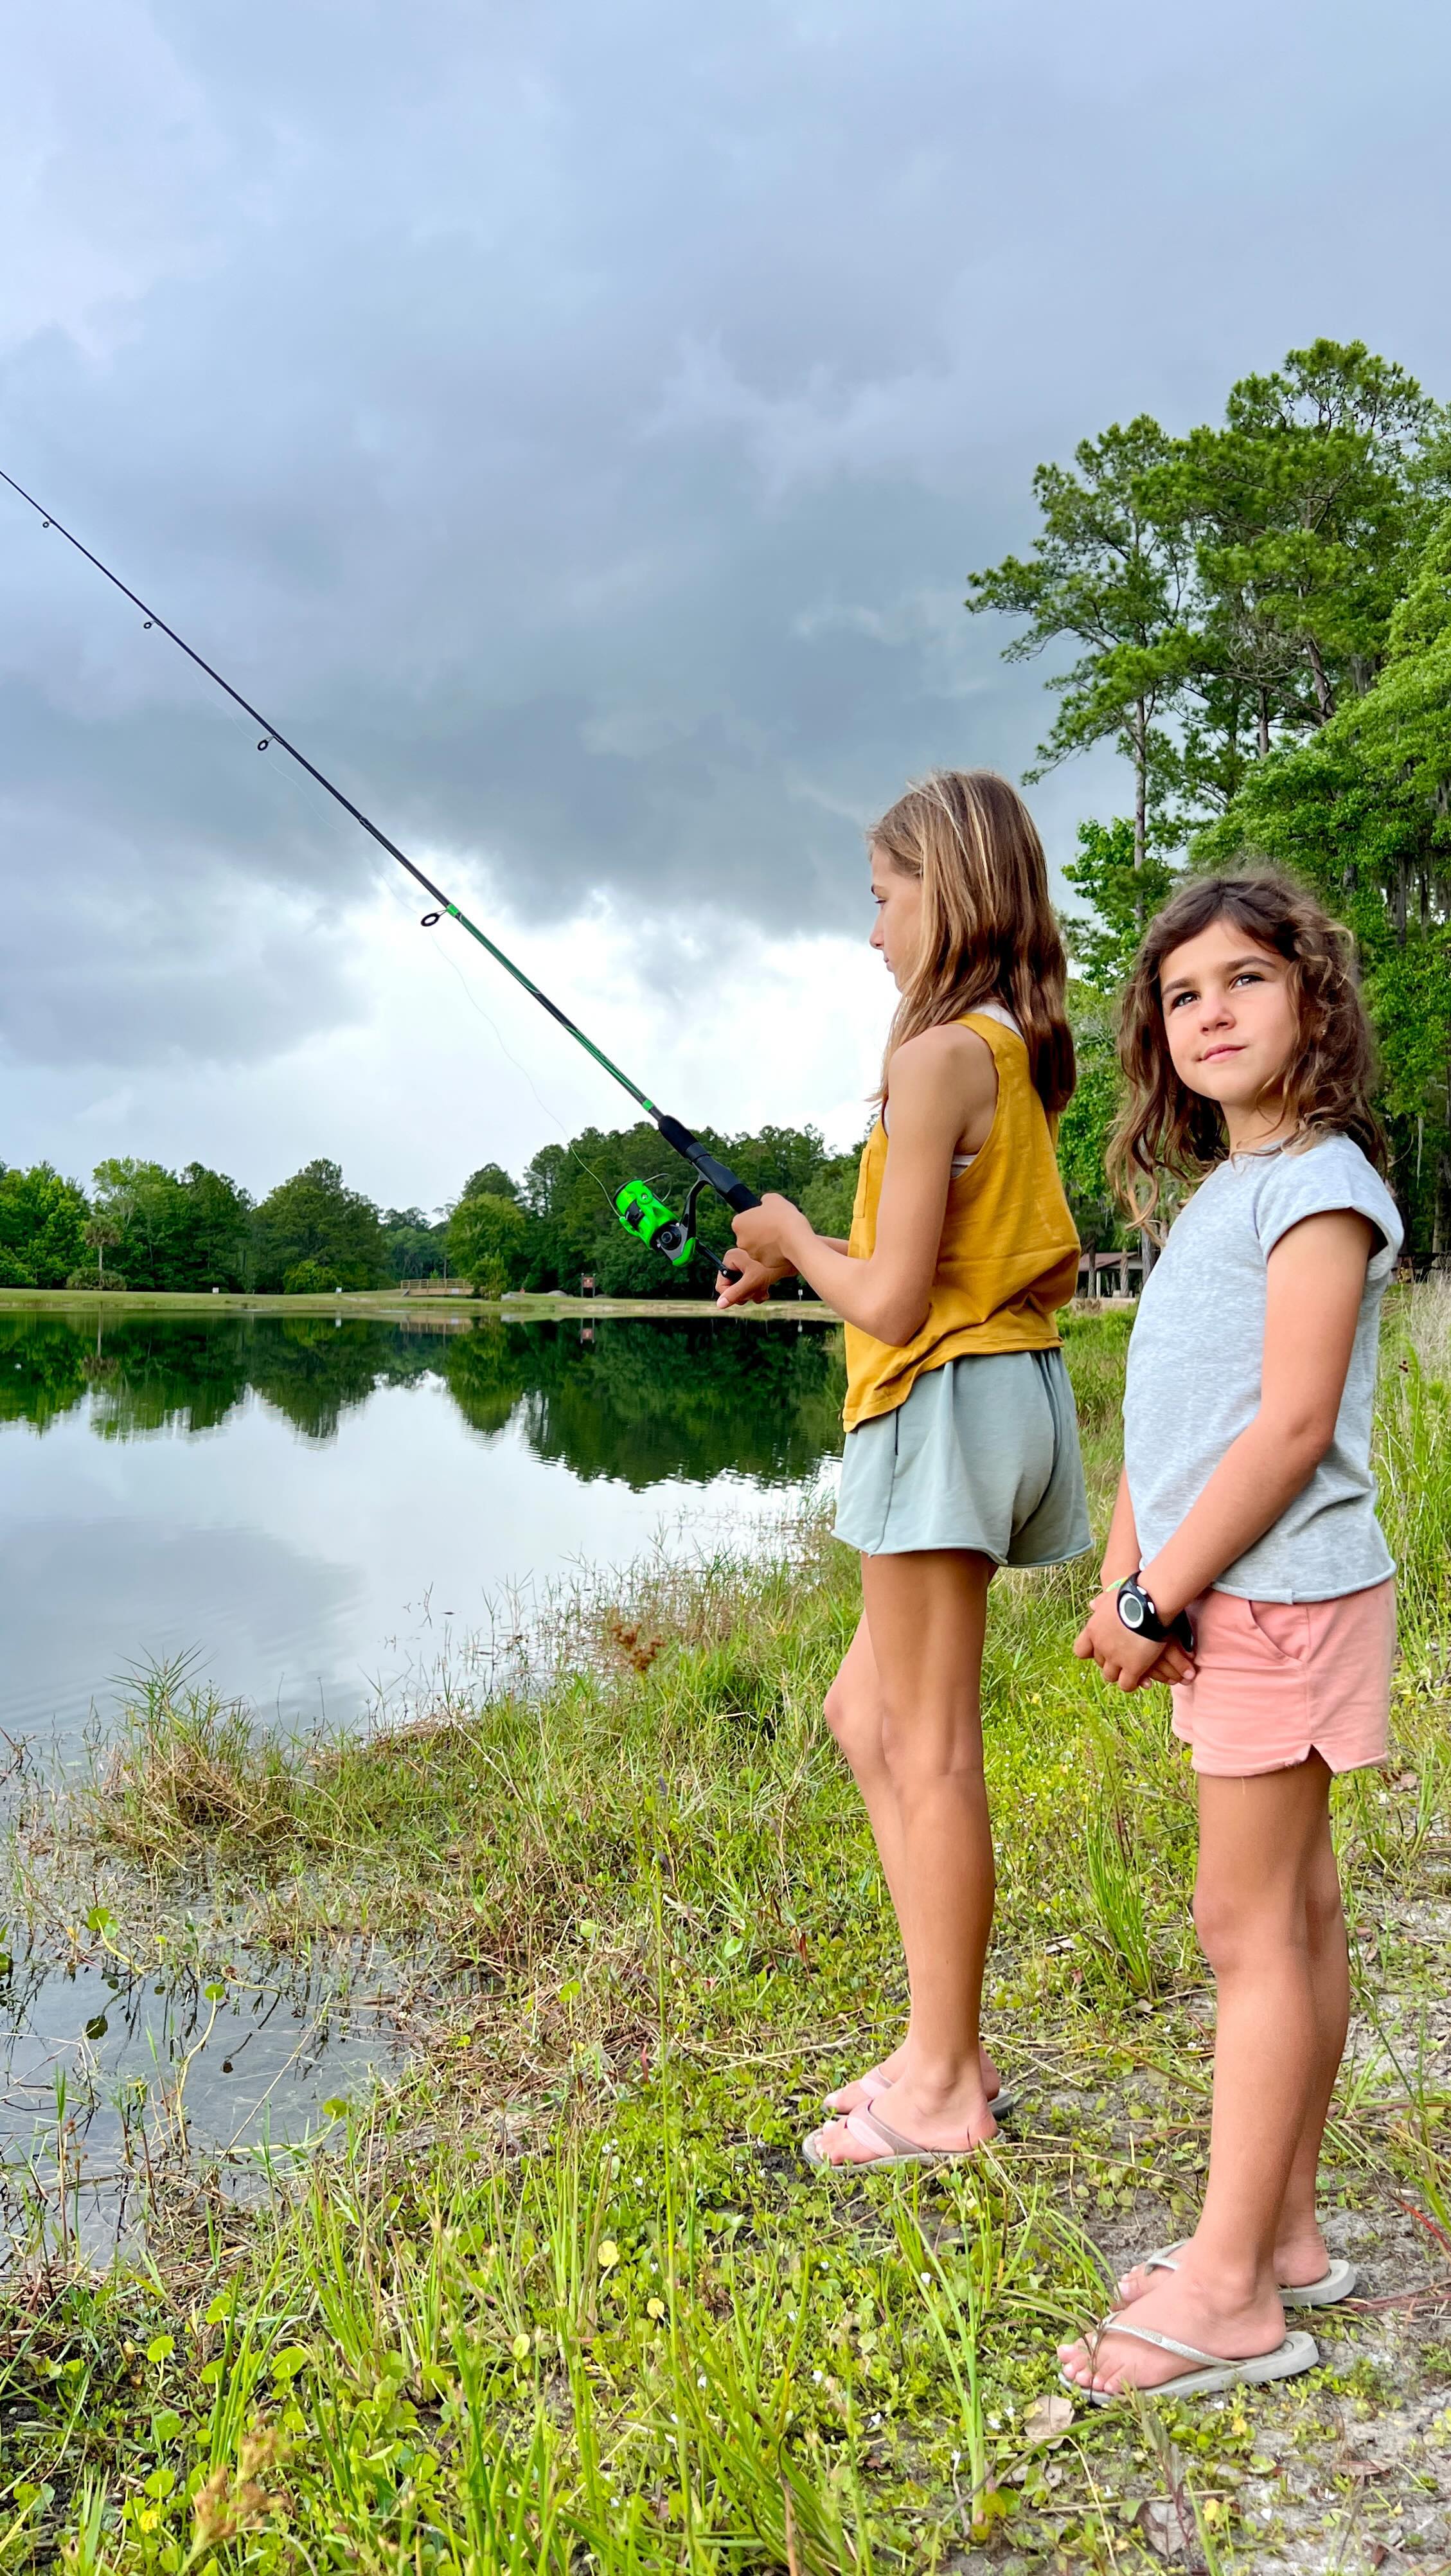 FISHING TIPS⁣
🐟⁣
From a non-fishing mom! ⁣
⁣
💕 Focus on the quality time ⁣
⁣
🌈 Get colorful baits and rods. We went to Walmart and let the kids pick their favorites⁣
 ⁣
🎣 Find helpful fishing and boating resources and how to buy a fishing license on TakeMeFishing.org ahead of time to build up confidence and learn about the sport ⁣
⁣
👨‍👩‍👧‍👦 Have fun. Make memories!!⁣
⁣
@take_me_fishing  #ad #womenmakingwaves #thewaterisopen #fishingwithkids #girlswhofish